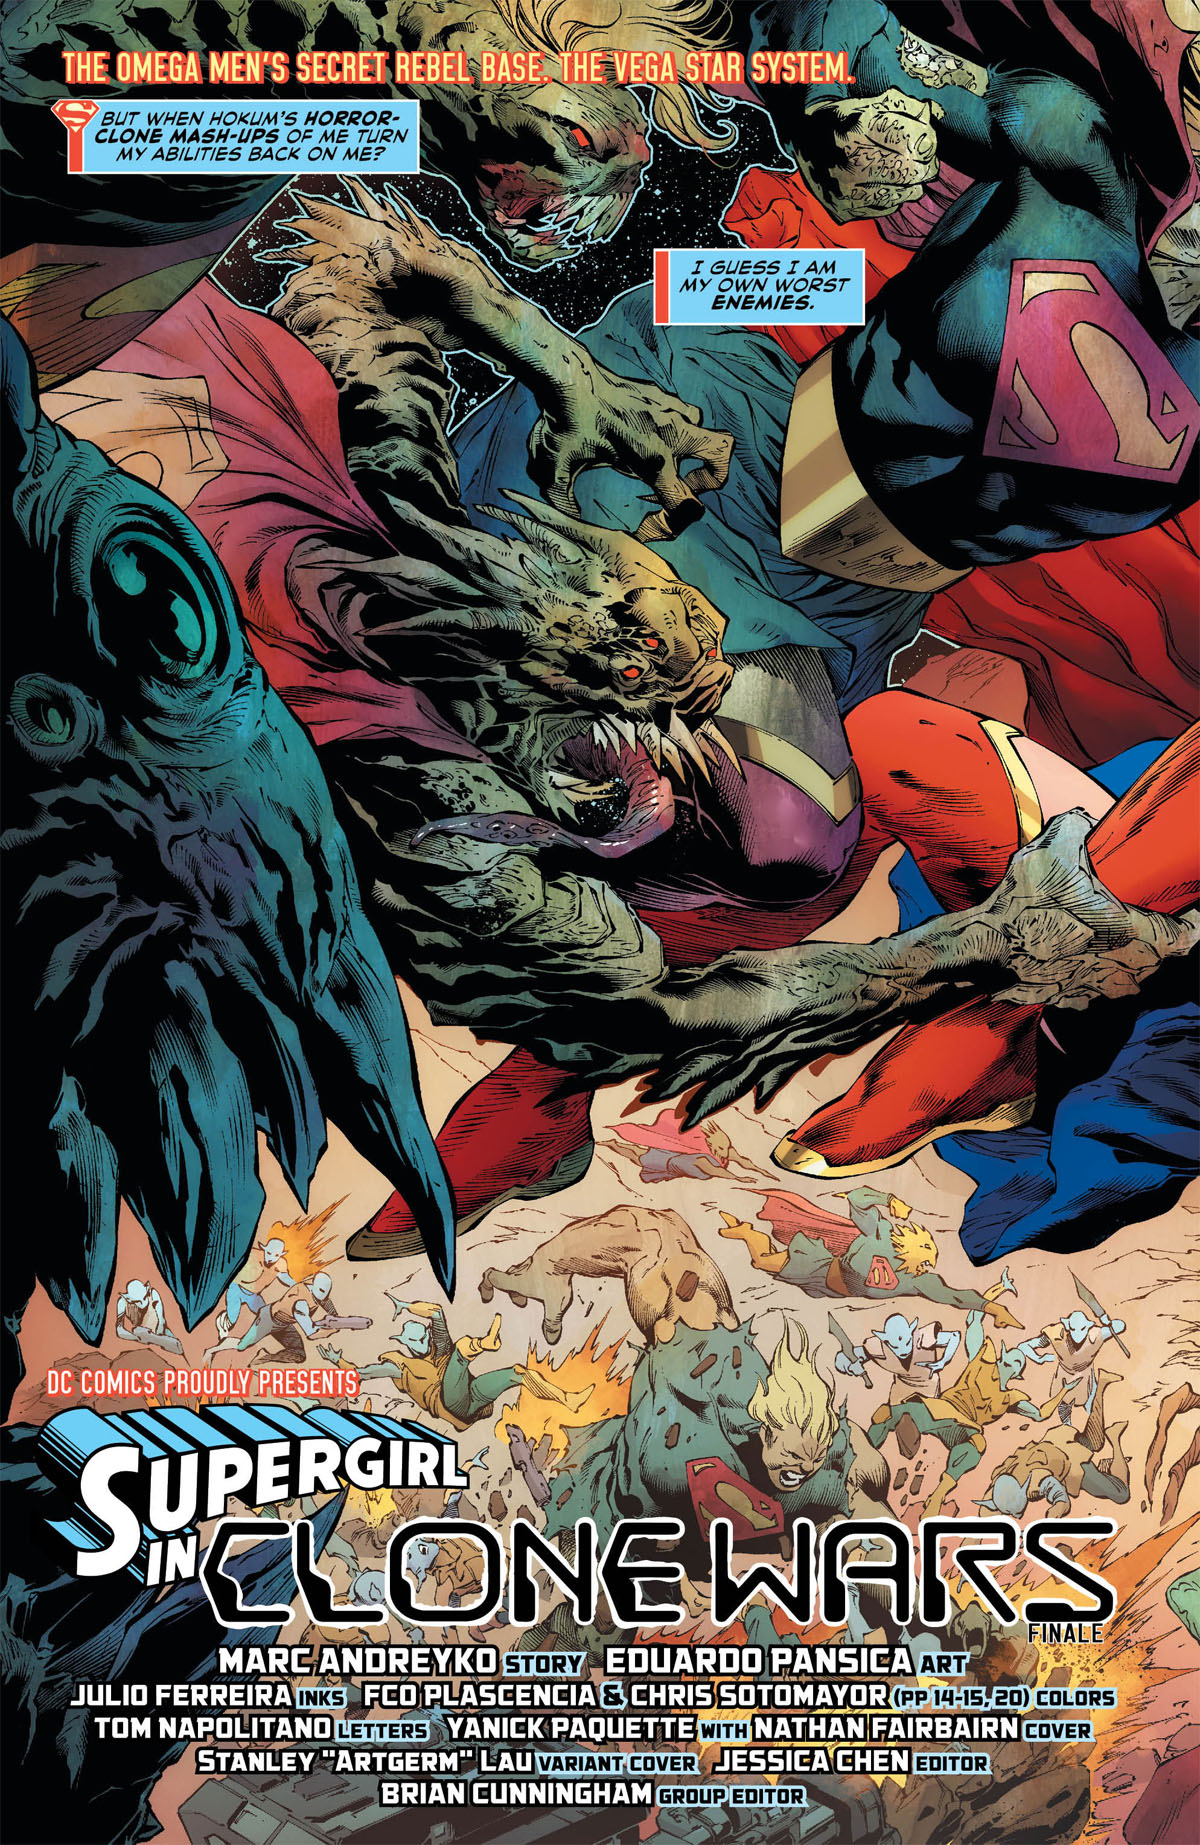 Supergirl #28 page 2